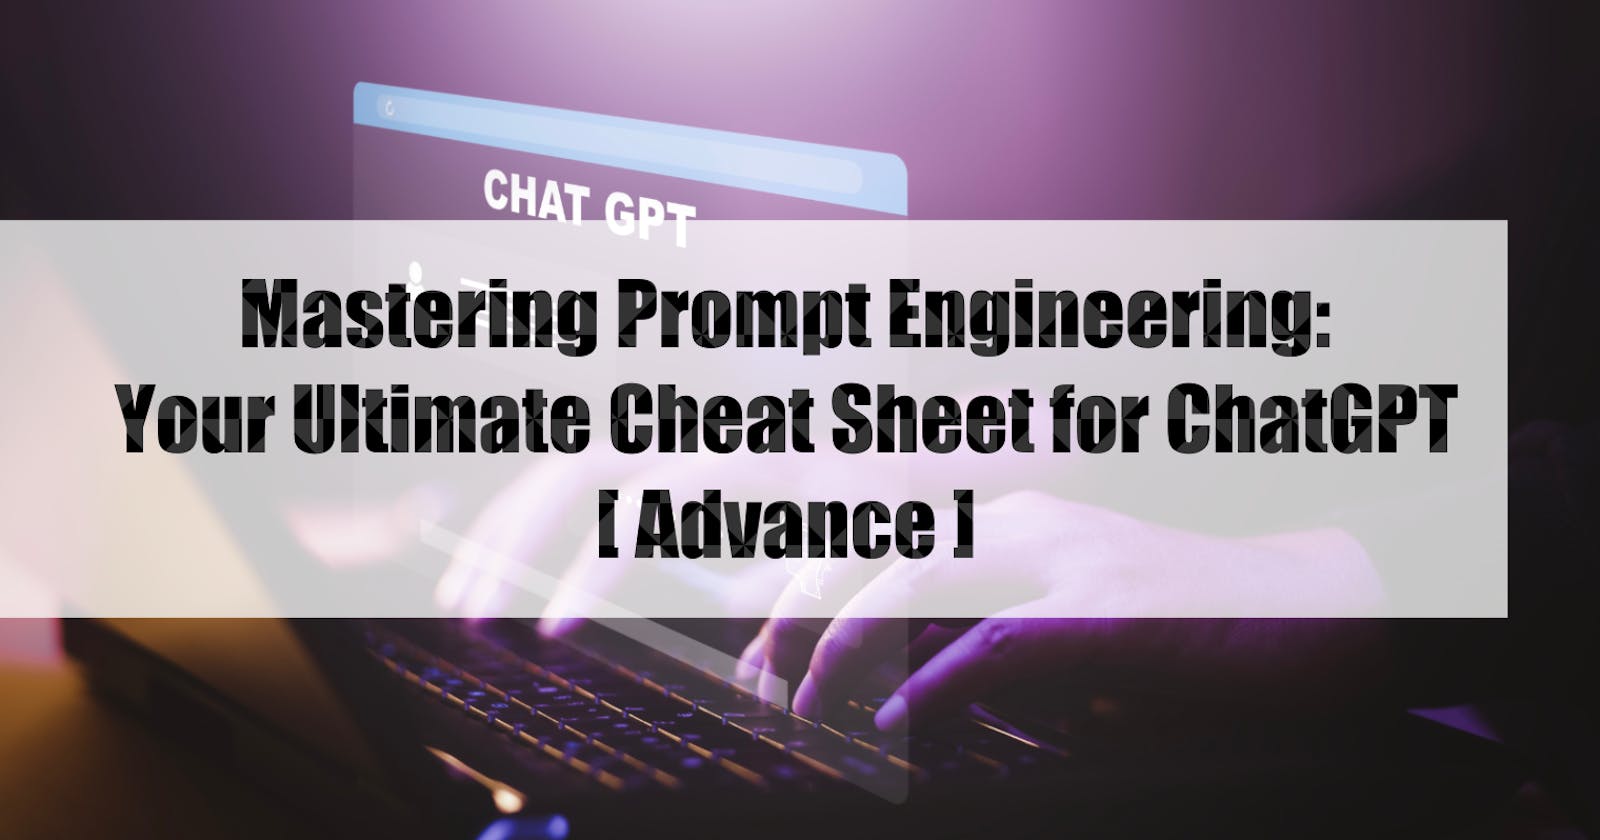 Mastering Prompt Engineering: Your Ultimate Cheat Sheet for ChatGPT [ Advance ]